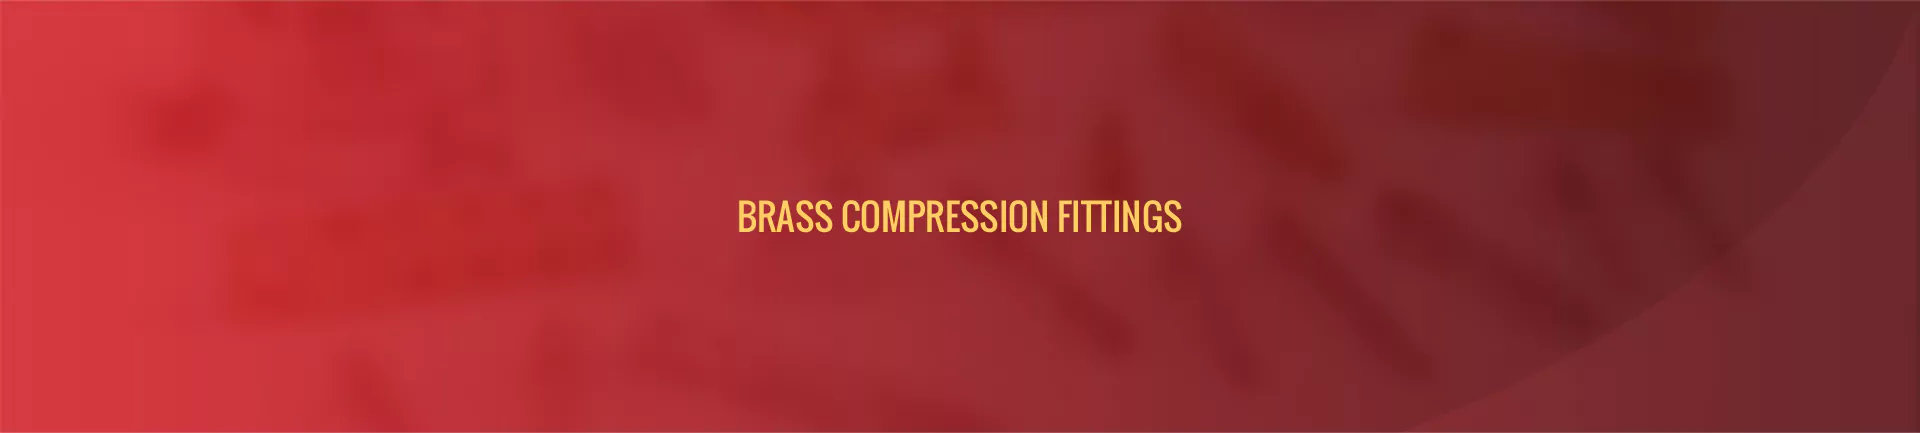 brass-compression-fittings-banner